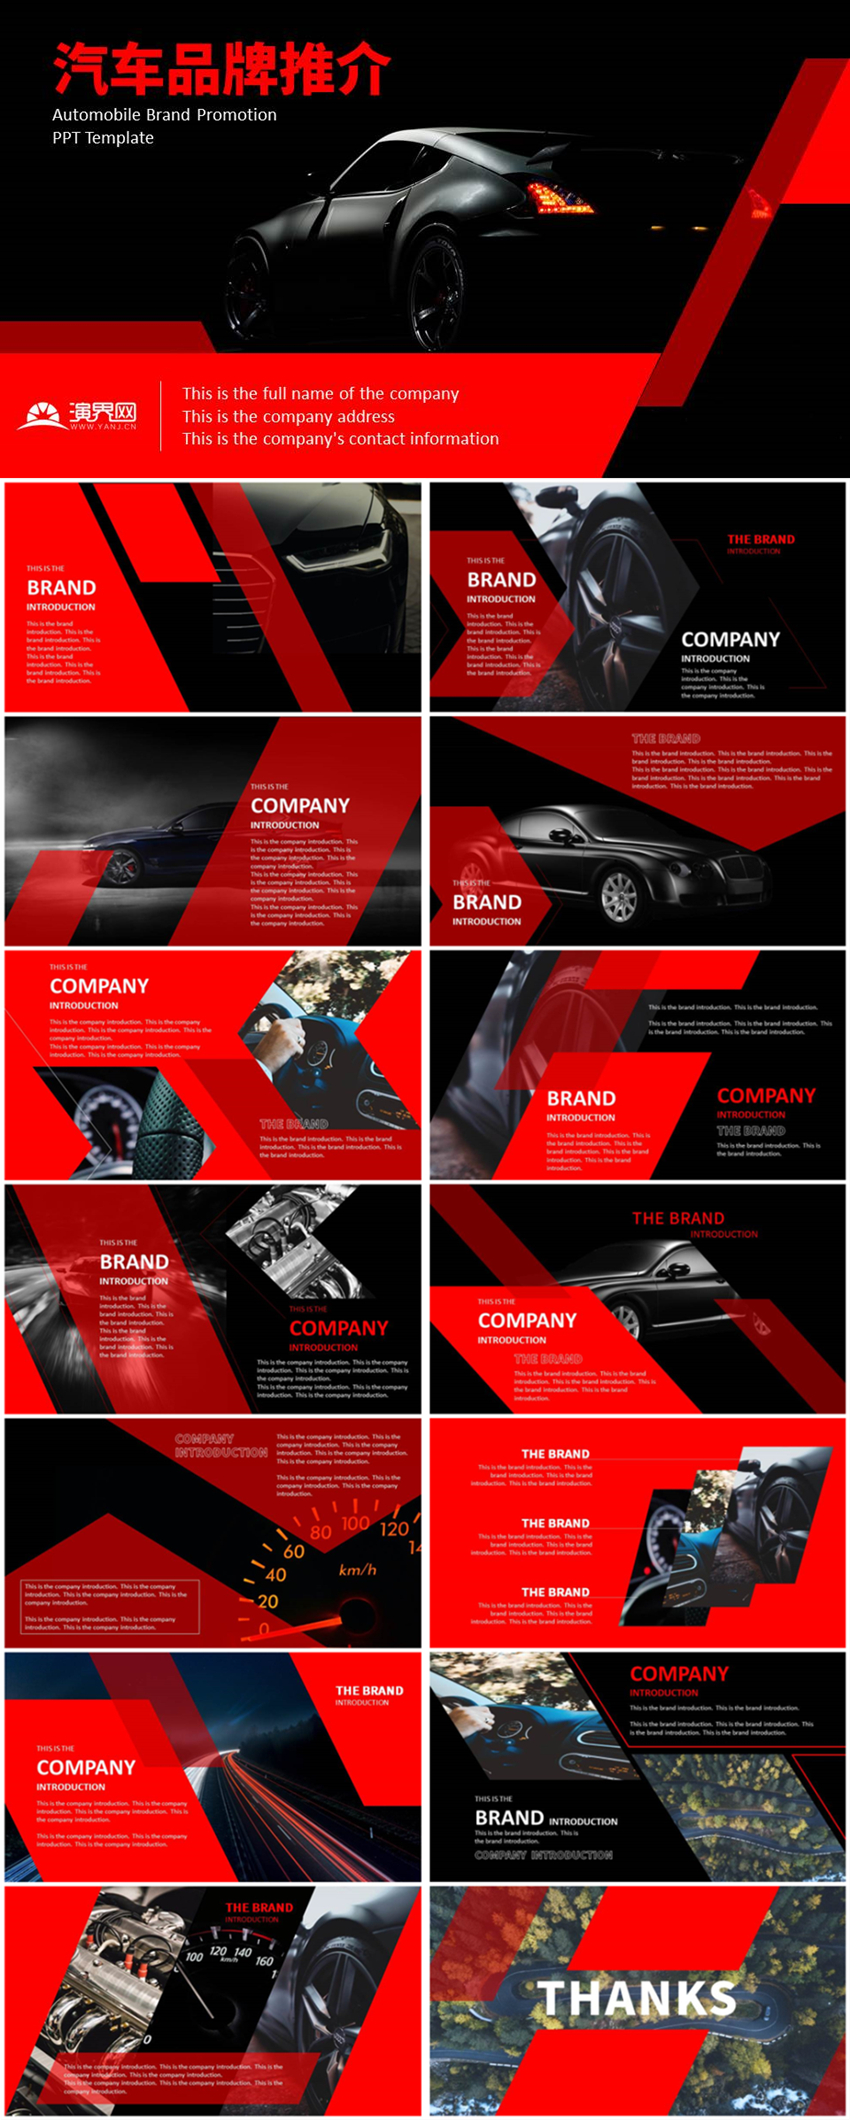  PPT template for Red Black automobile brand promotion